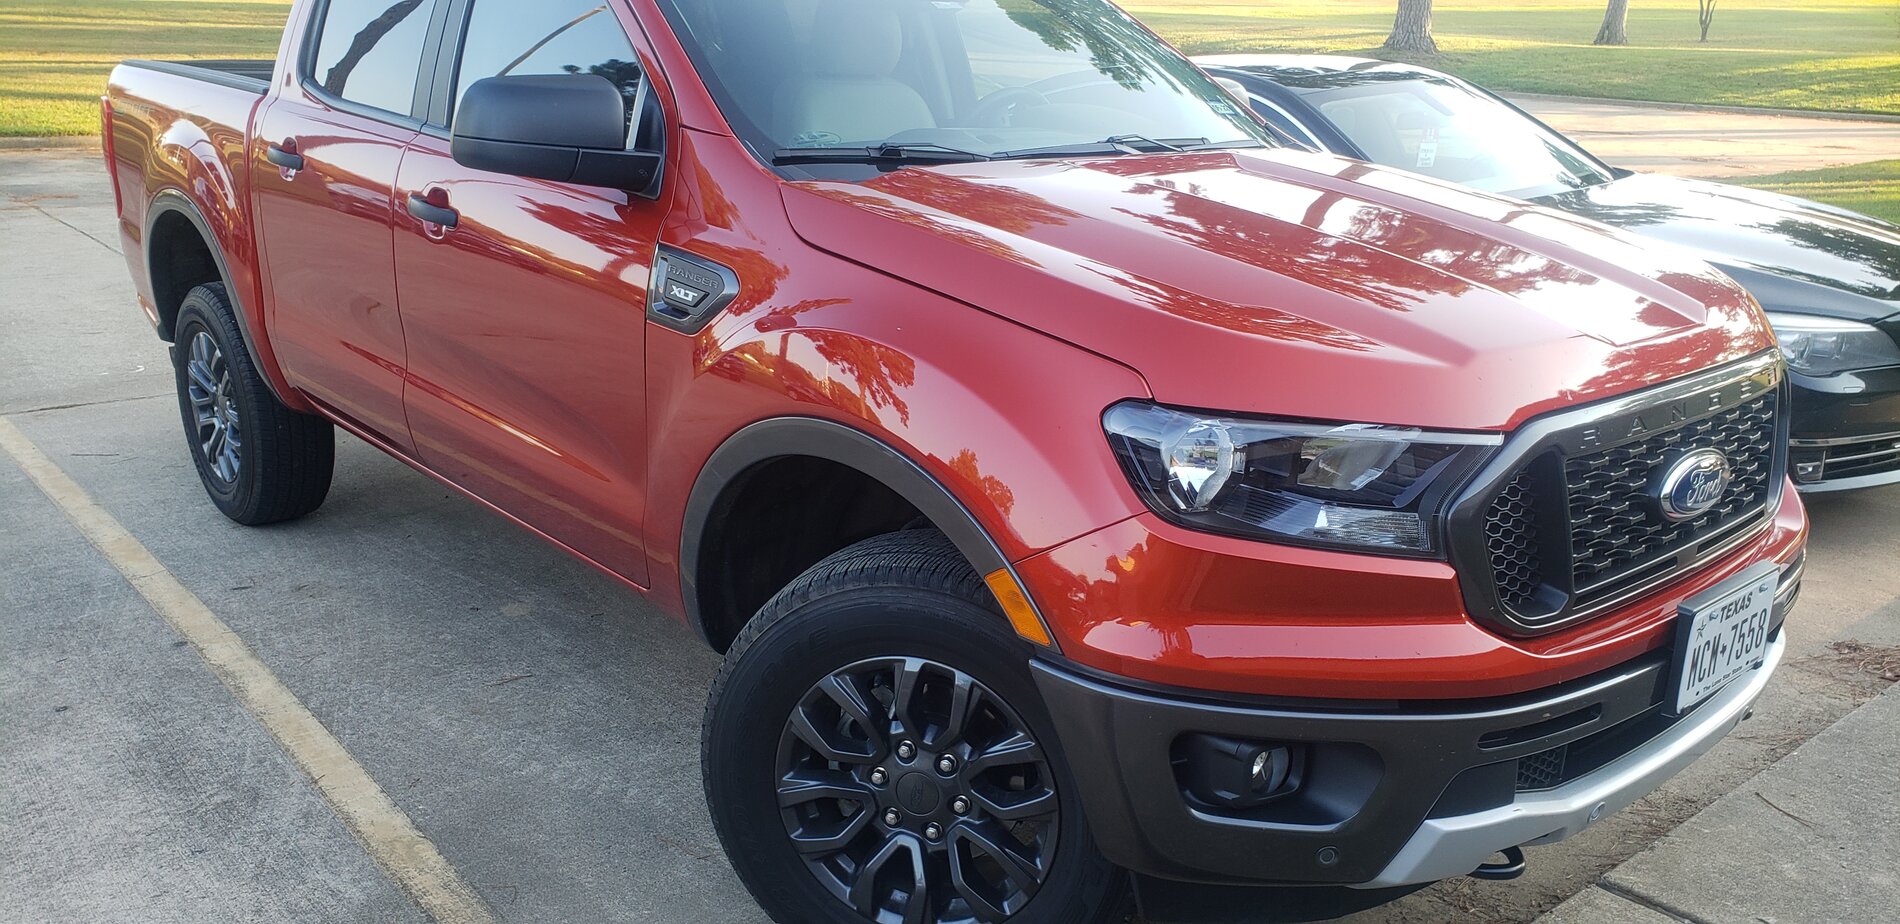 Ford Bronco Rapid Red / Hot Pepper Red comparison? 20210920_181528